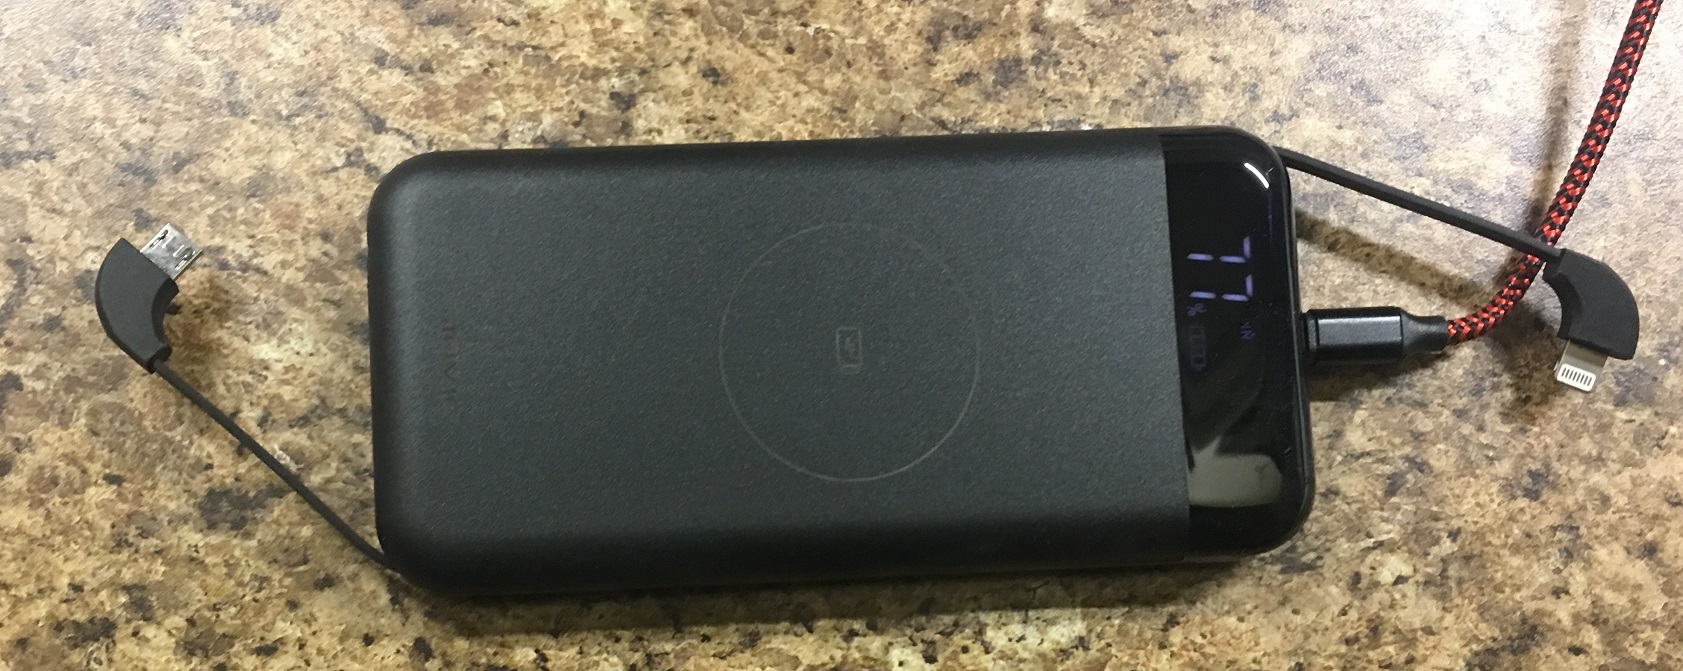 My first truly universal power bank